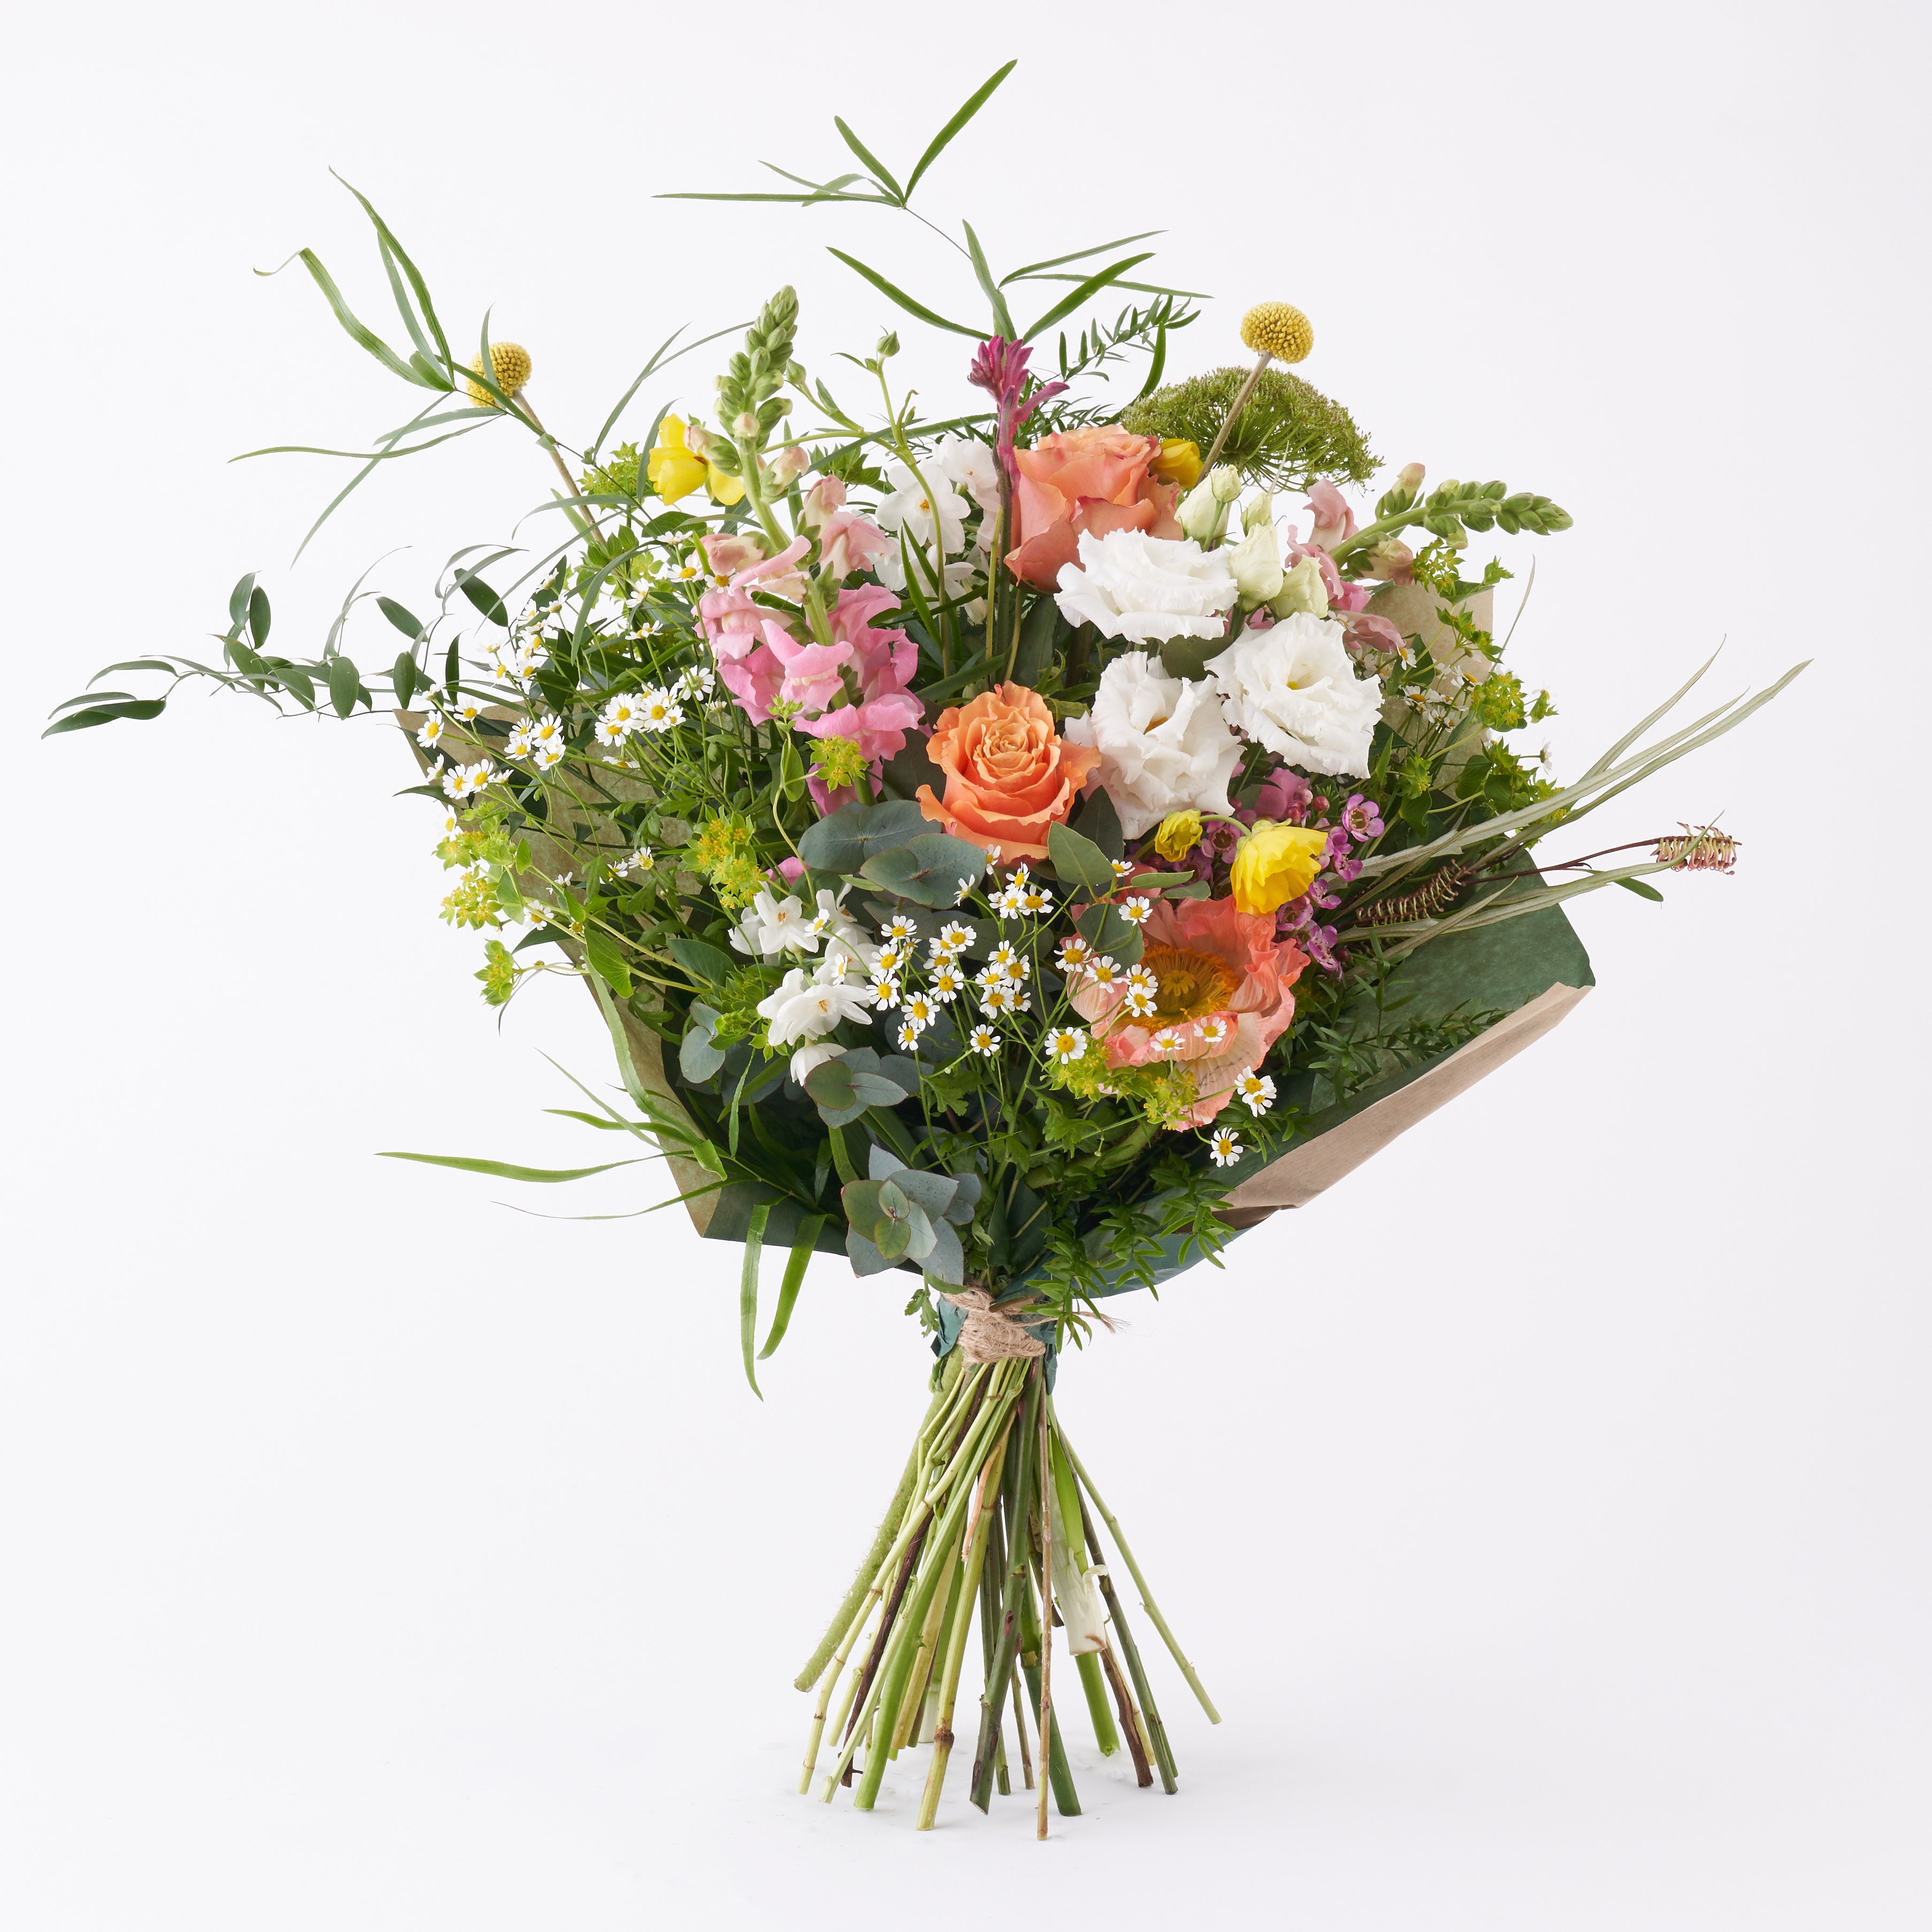 meadow in bloom fresh flowers bouquet for same and next day delivery in London and UK